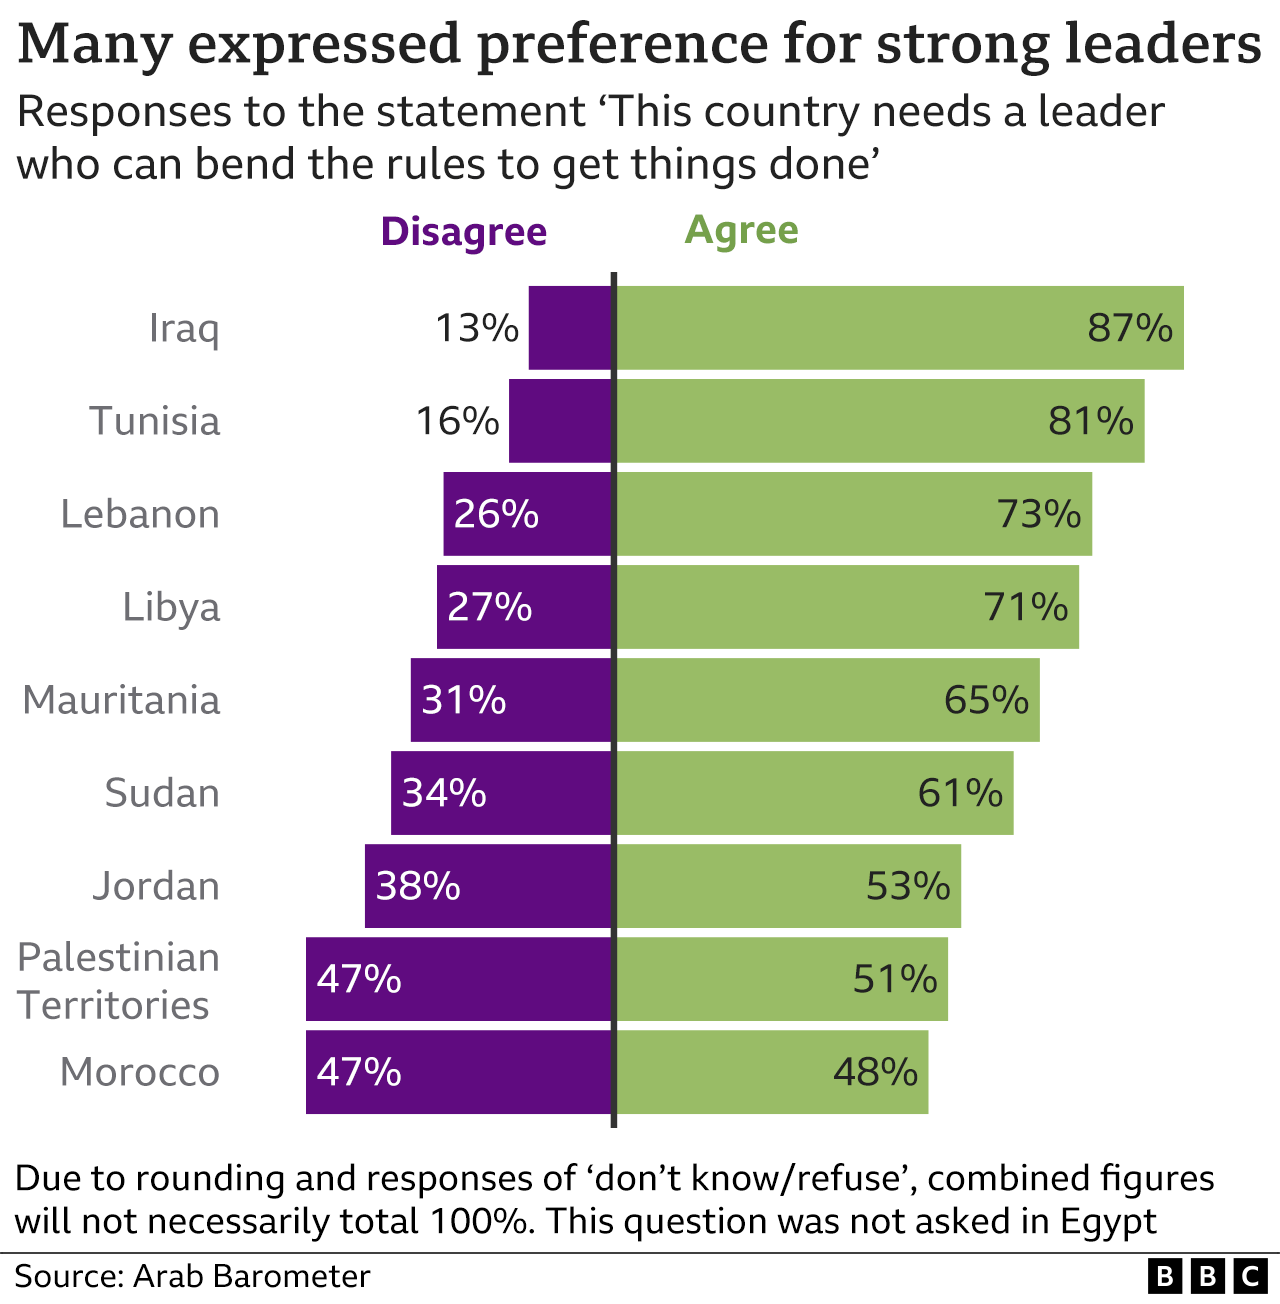 Chart showing split responses to the statement: This country needs a leader who can bend the rules to get things done. Iraq had the highest proportion who agree (87%) with only 13% who disagree. Followed by Tunisia and Lebanon. In Morocco and the Palestinian Territories, the responses were more evenly split.